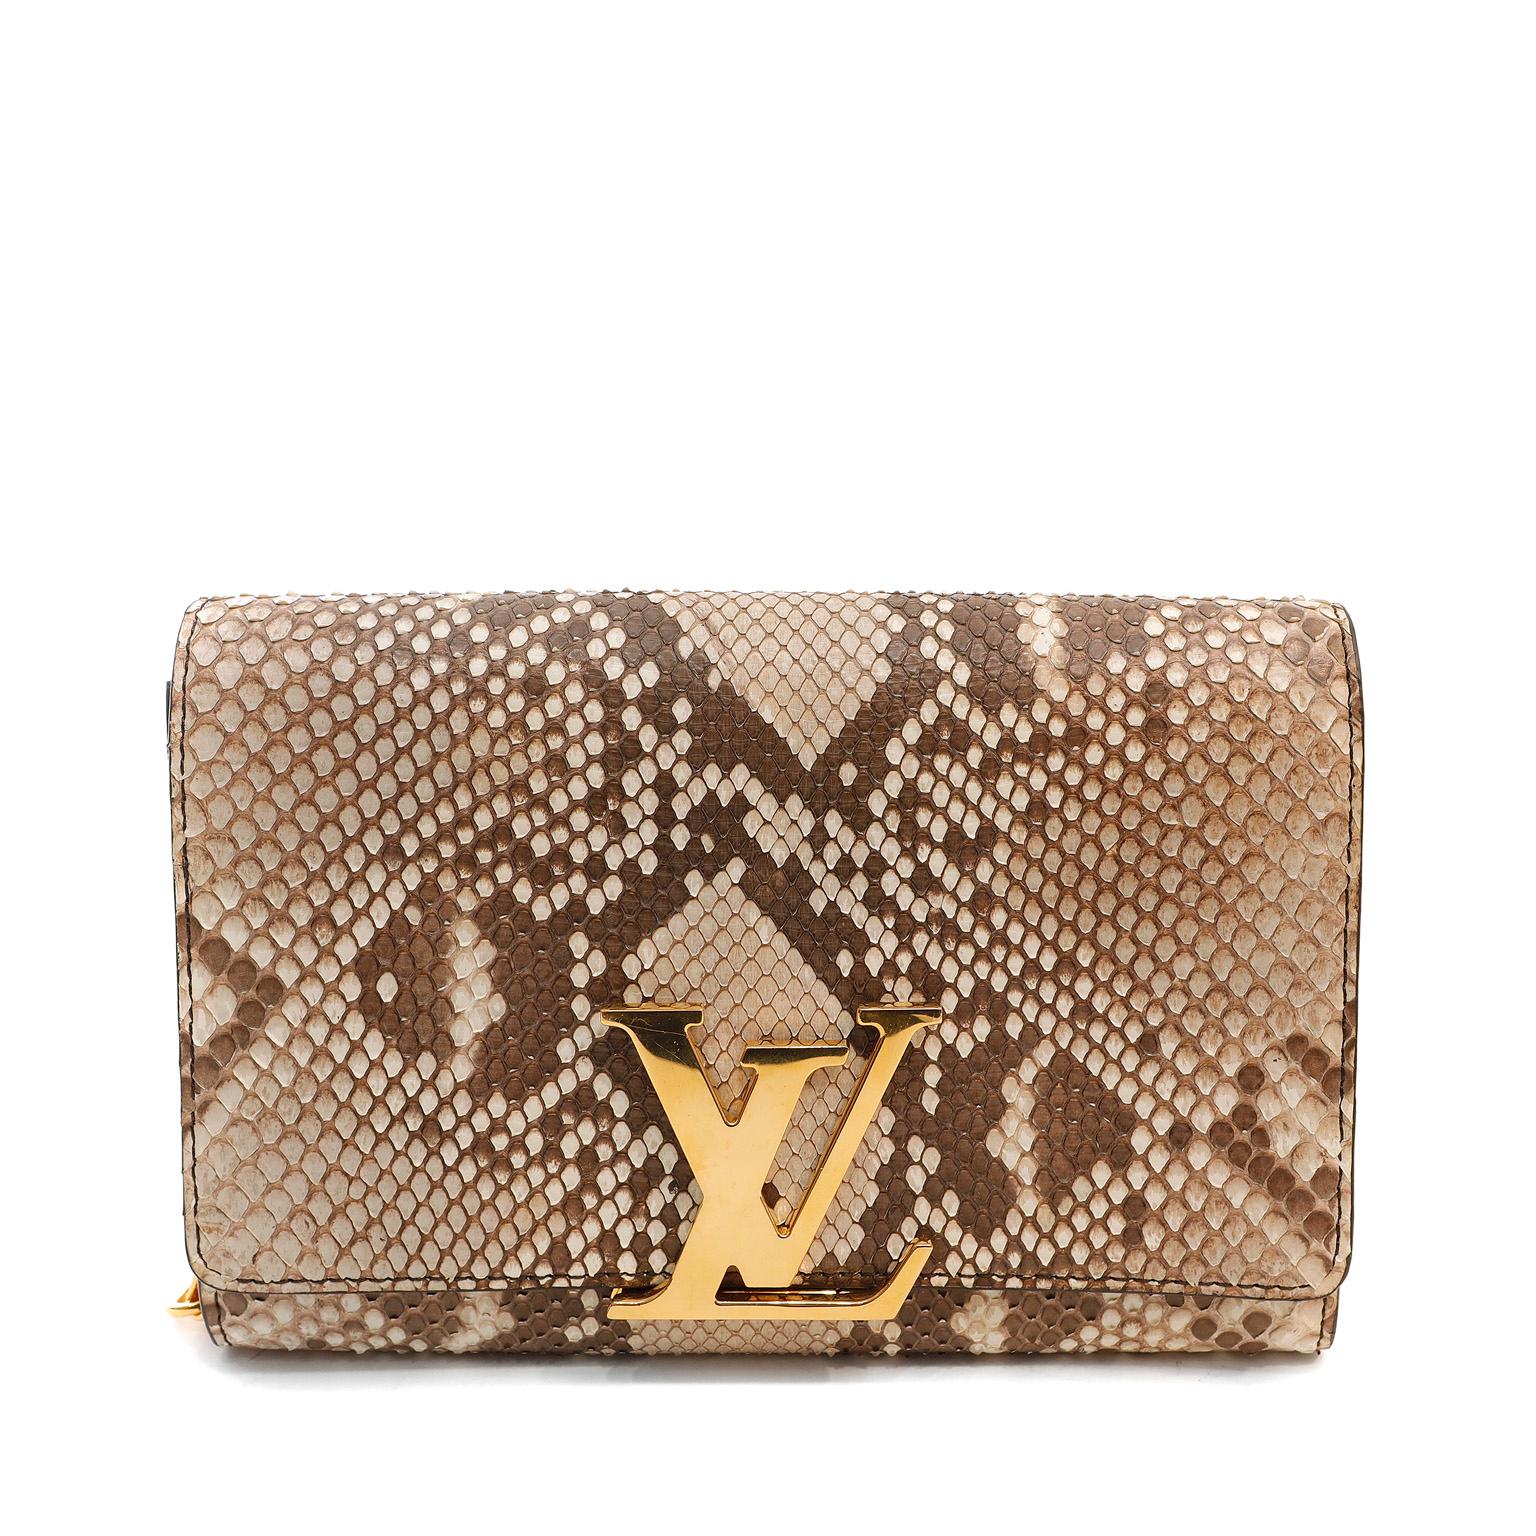 This authentic Louis Vuitton Beige Python Louise GM is in excellent plus condition.  Perfectly scaled in the GM silhouette, this neutral chain bag easily transitions for any occasion.  Beige and brown python with gold ton LV logo.  Gold link chain